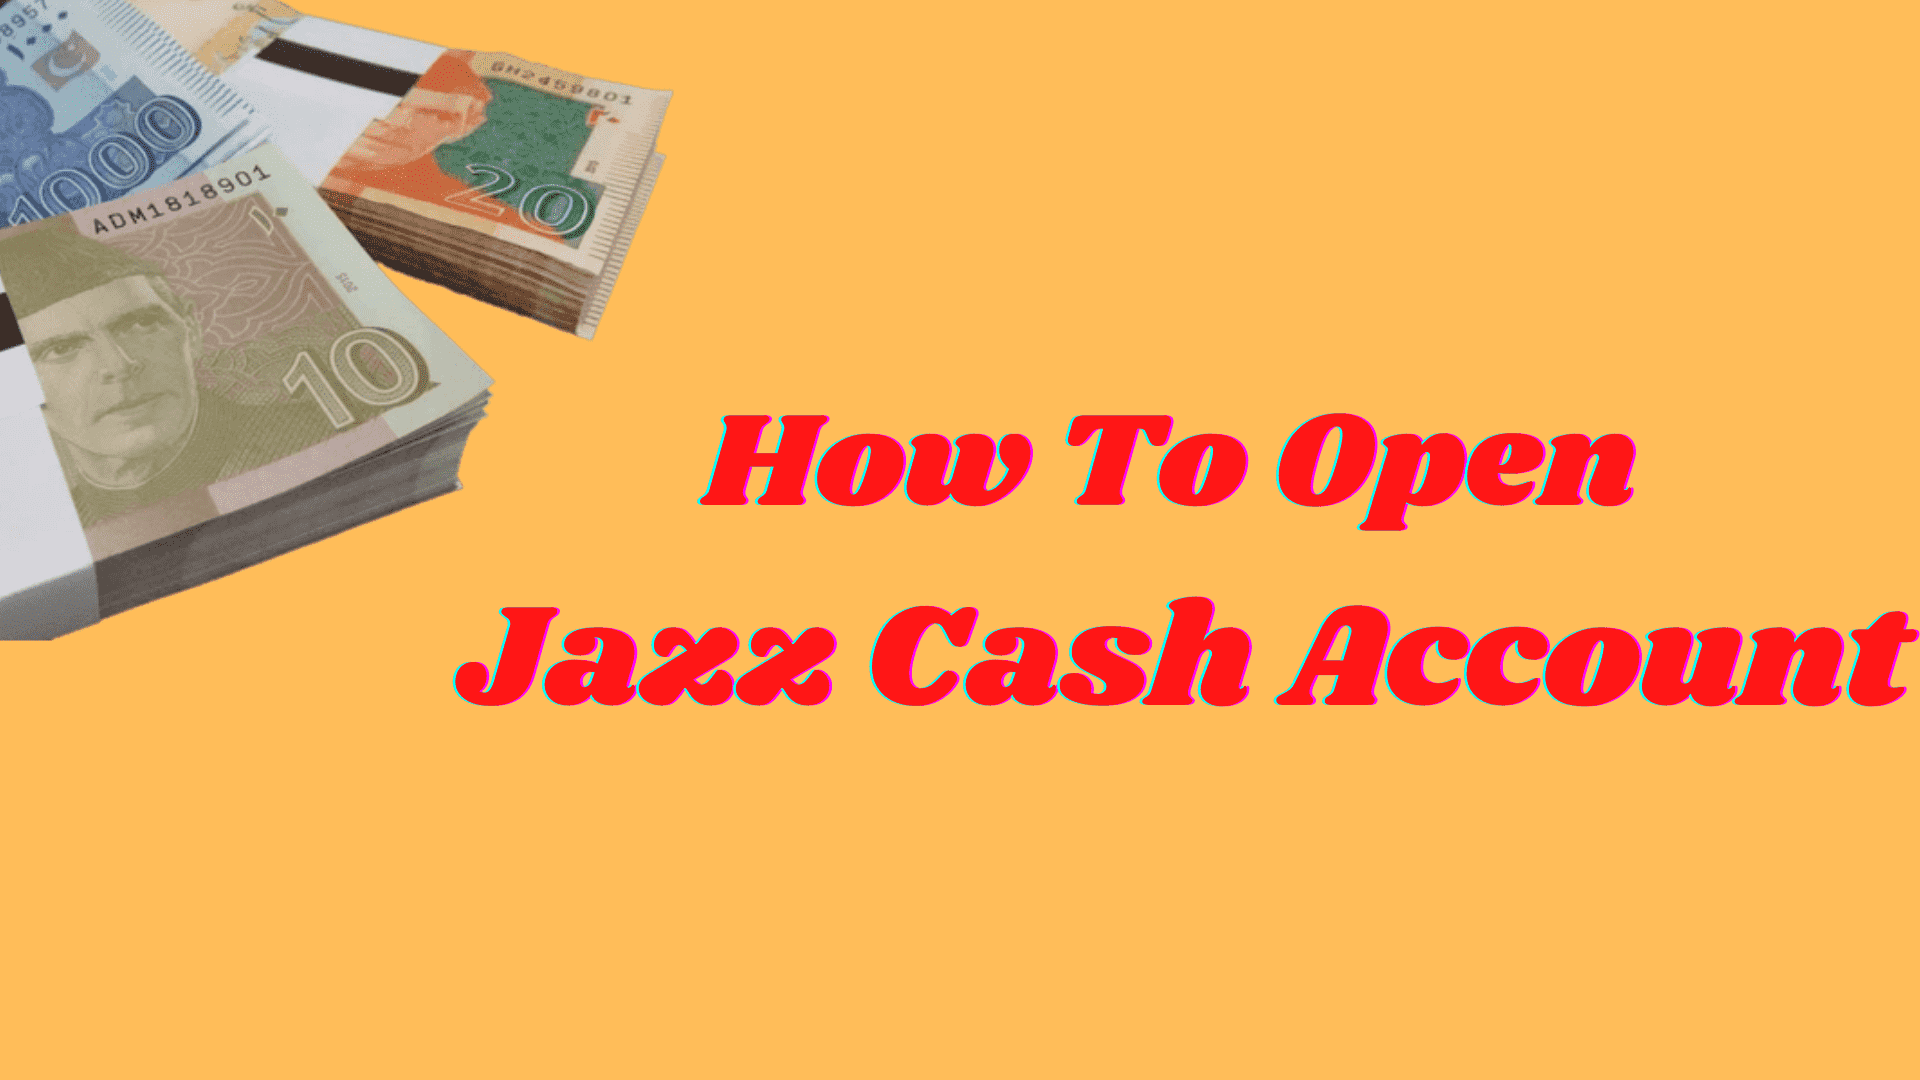 How To Open Jazz Cash Account Latest